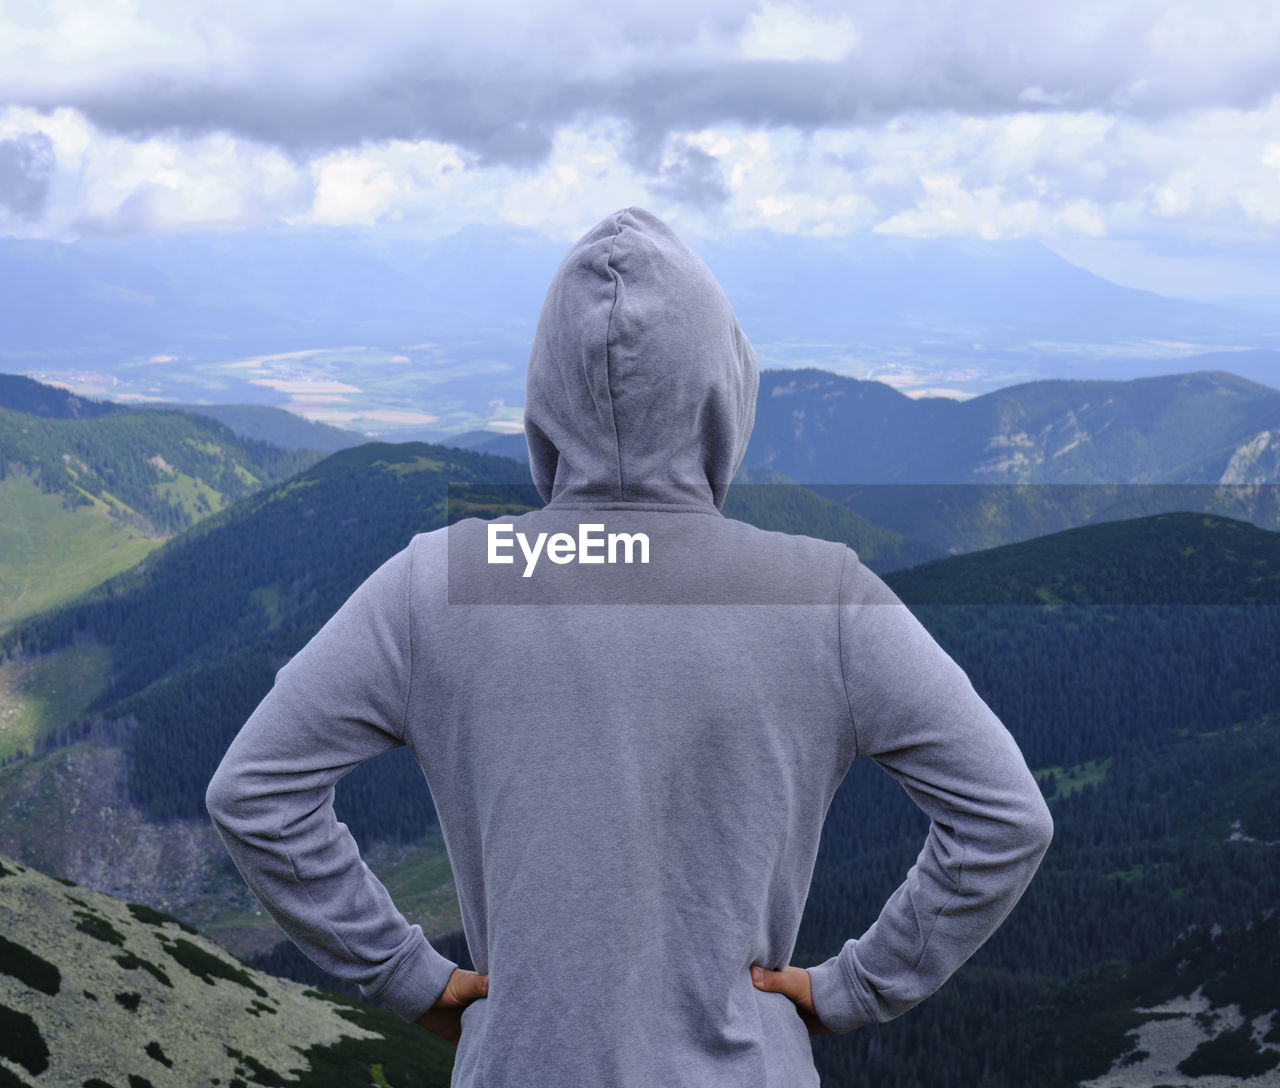 A boy in a sweatshirt from behind on top of a hill enjoys the view